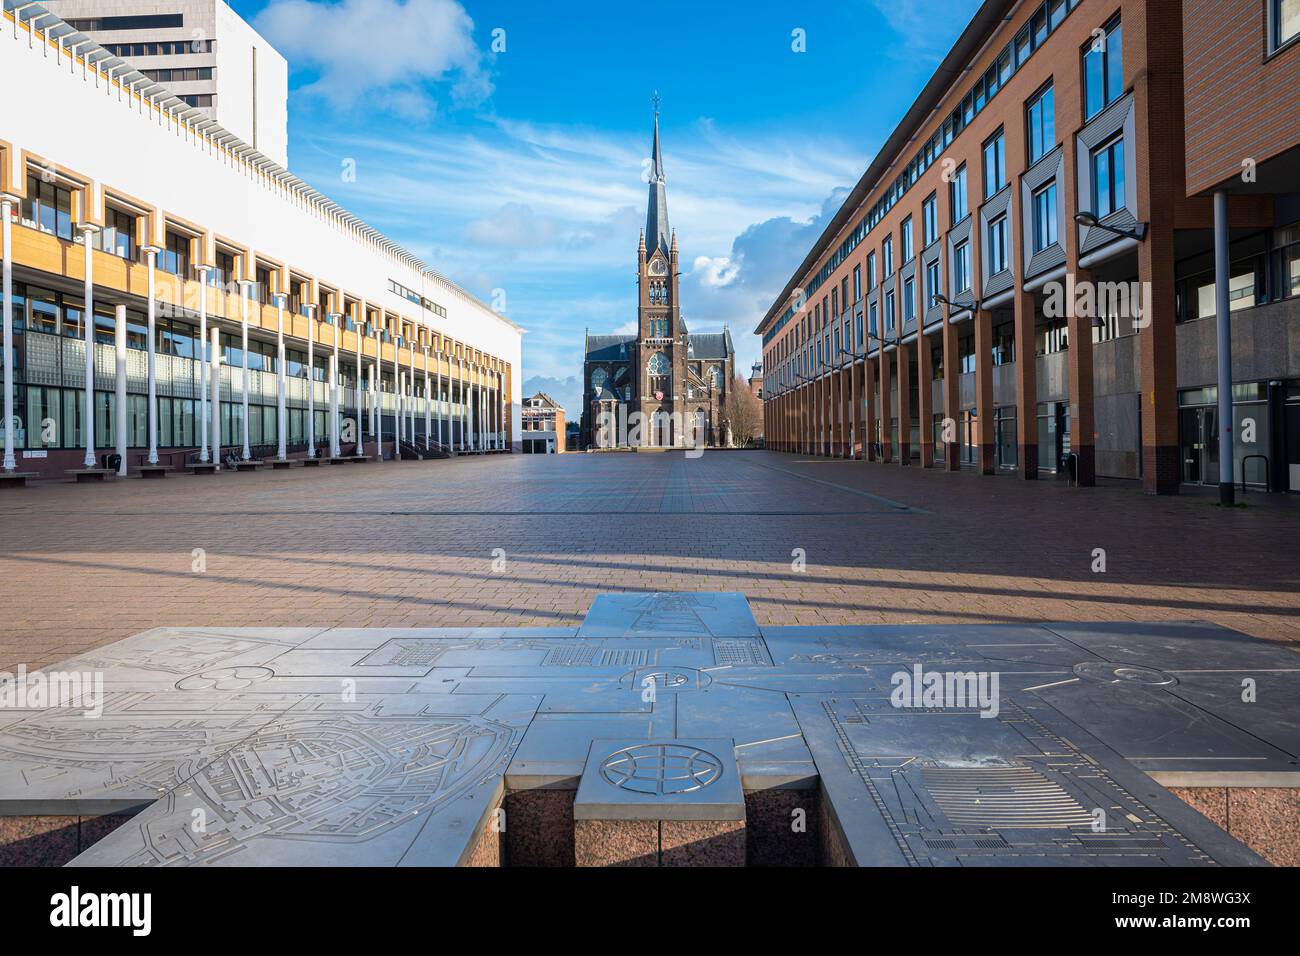 New town square with modern theater and stores.In middle the historic Catholic church 'Liduina Basilica' in the historic town of Schiedam, Holland. Stock Photo